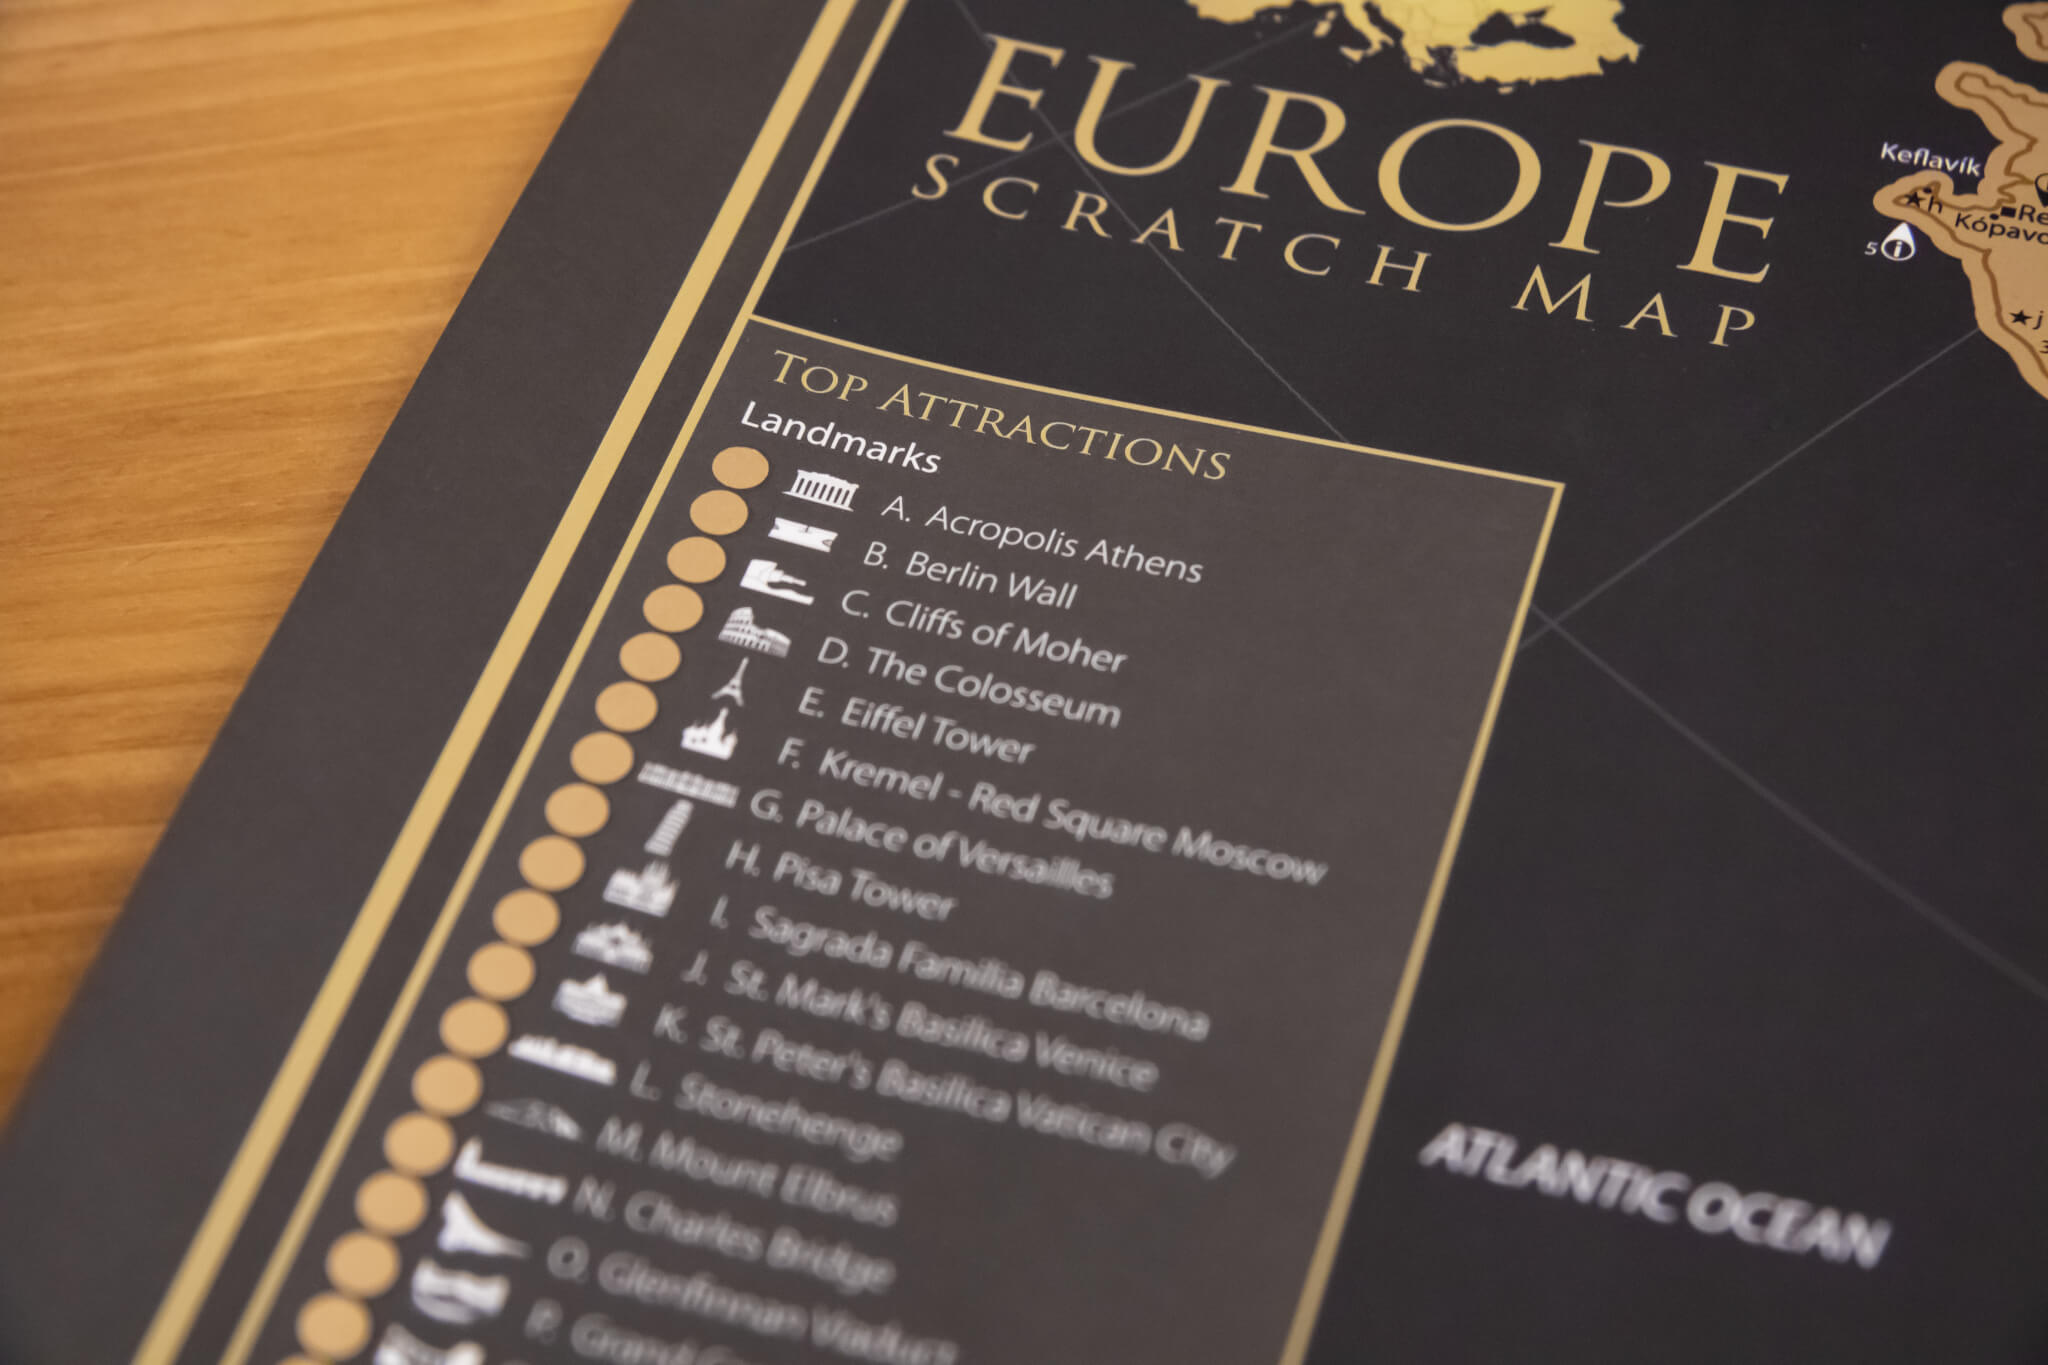 Scratch Map of Europe - Detail of Top Attractions